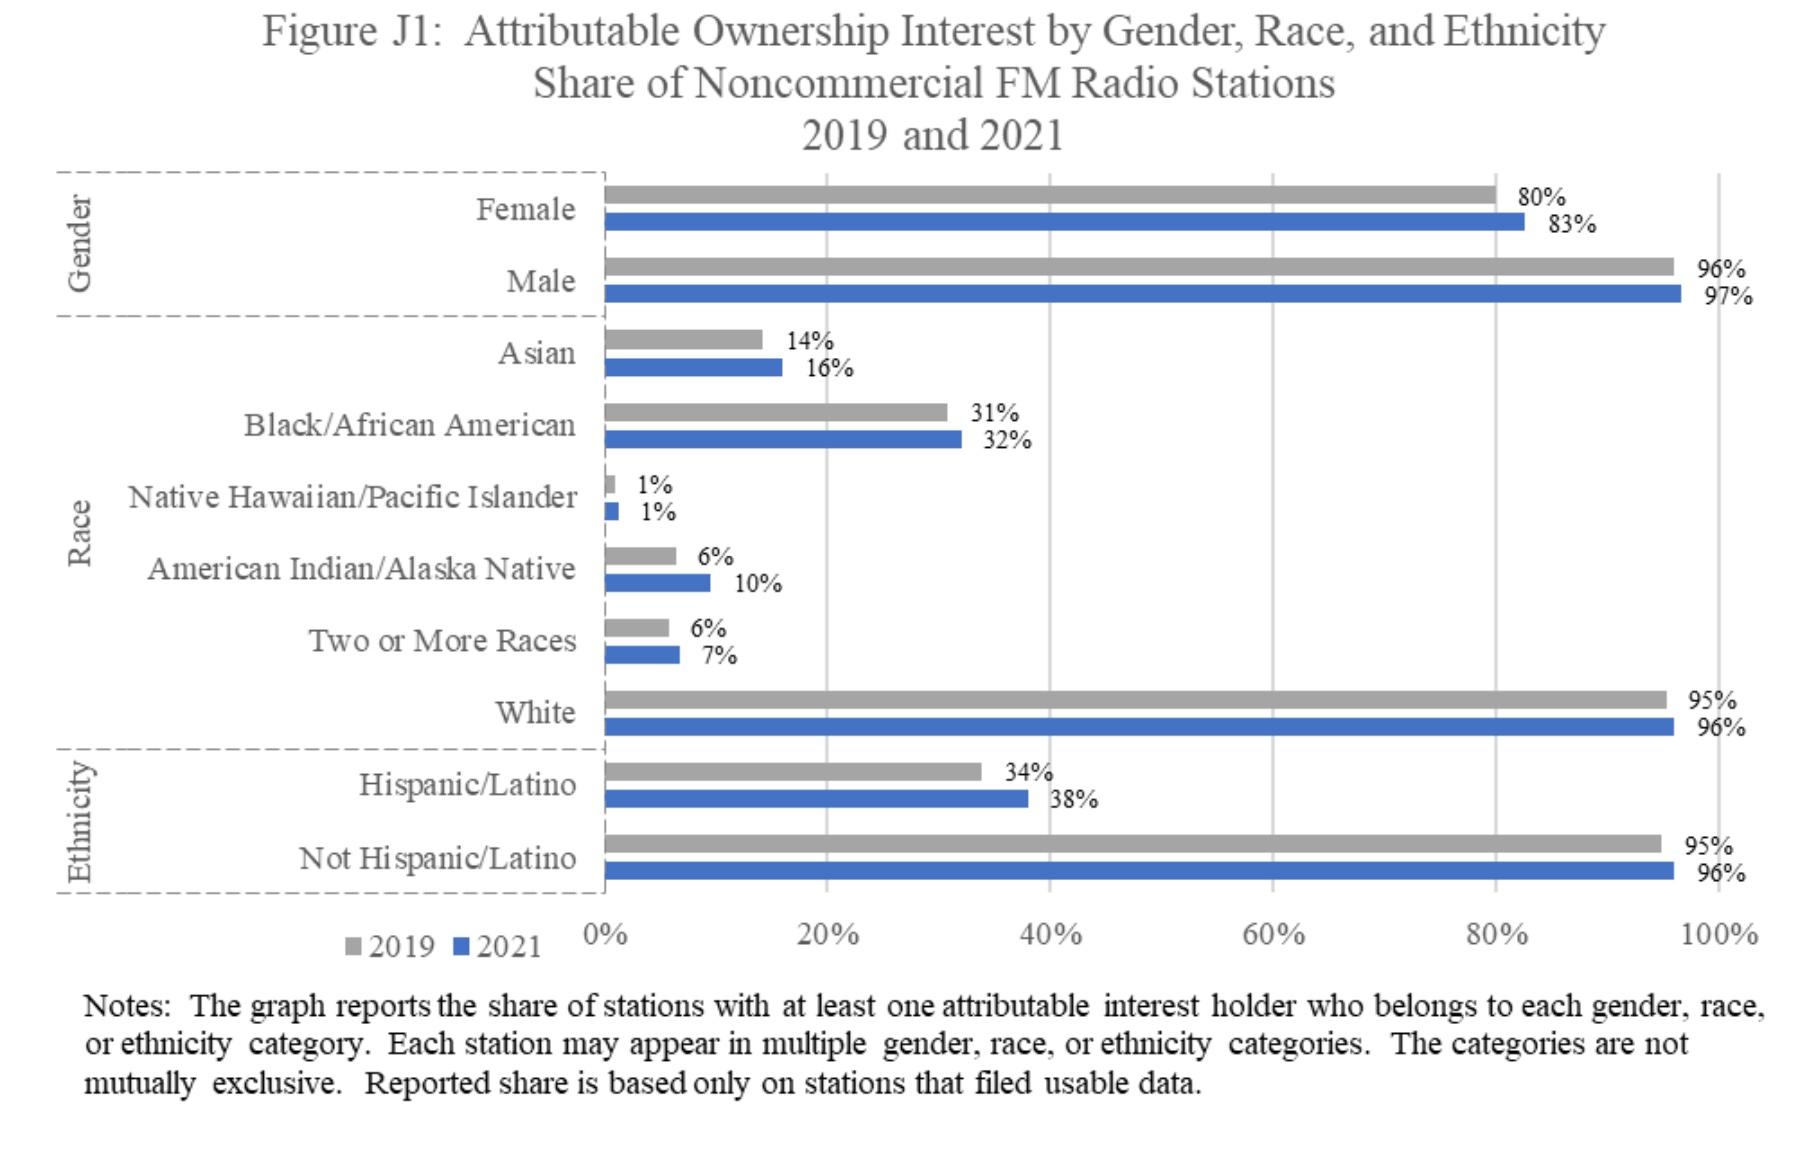 Attributable Ownership Interest by Gender, Race, and Ethnicity Share of Noncommercial FM Radio Stations